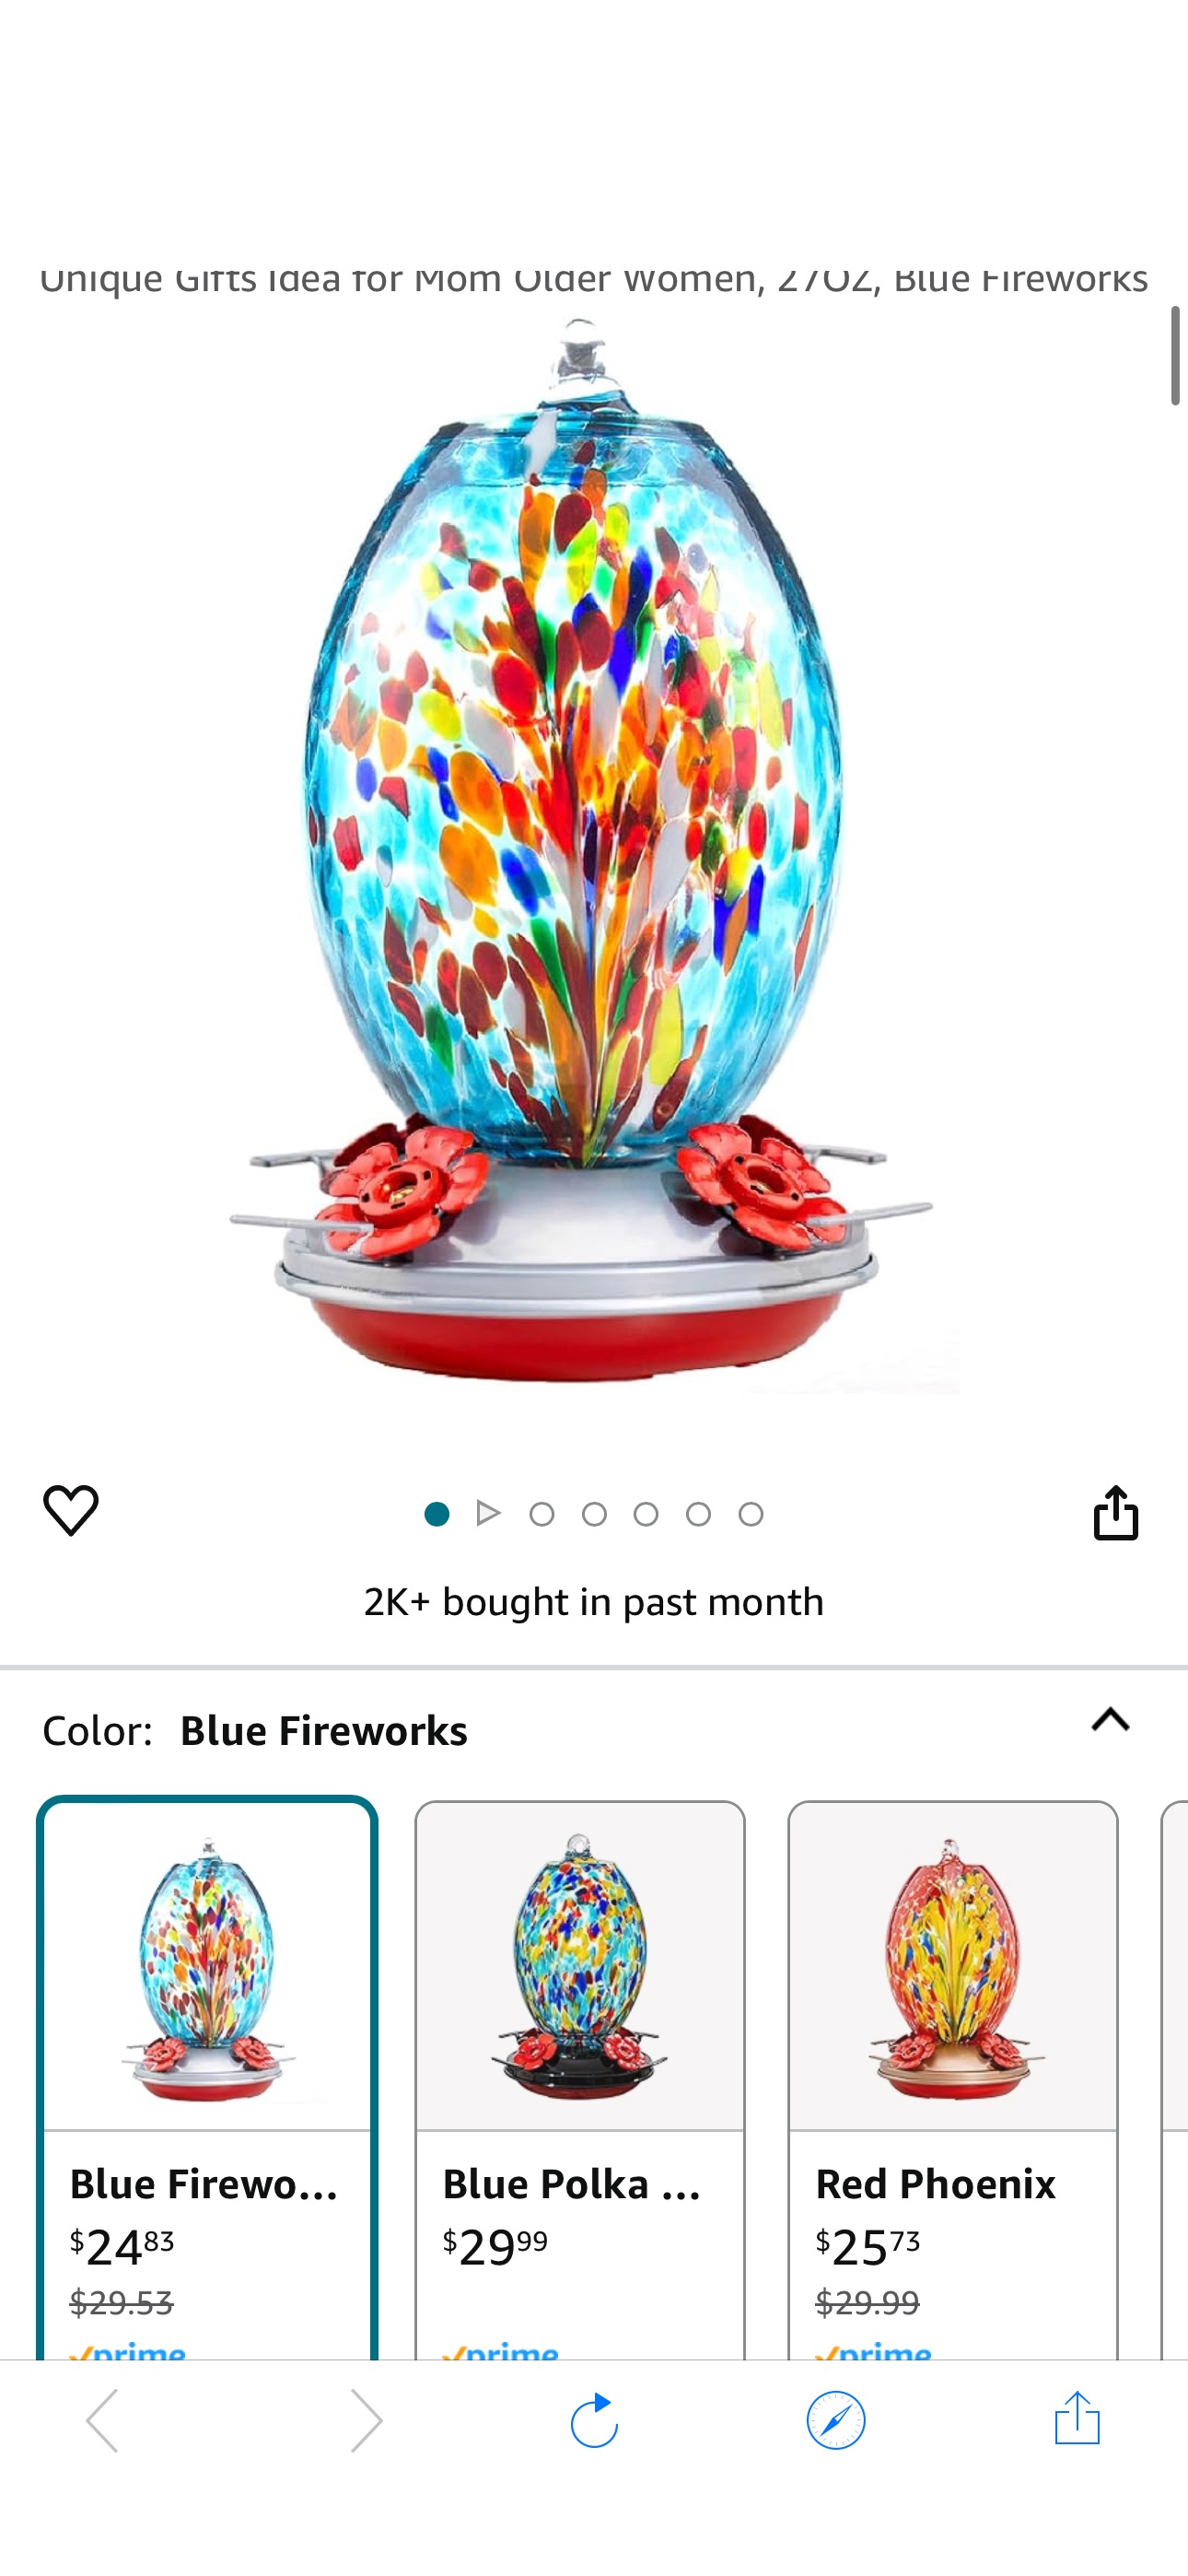 For Prime members only, this Muse Garden Blown-Glass Hummingbird Feeder drops from $35.99 to $24.86 to $21.10 when you click the on-site coupon at Amazon.